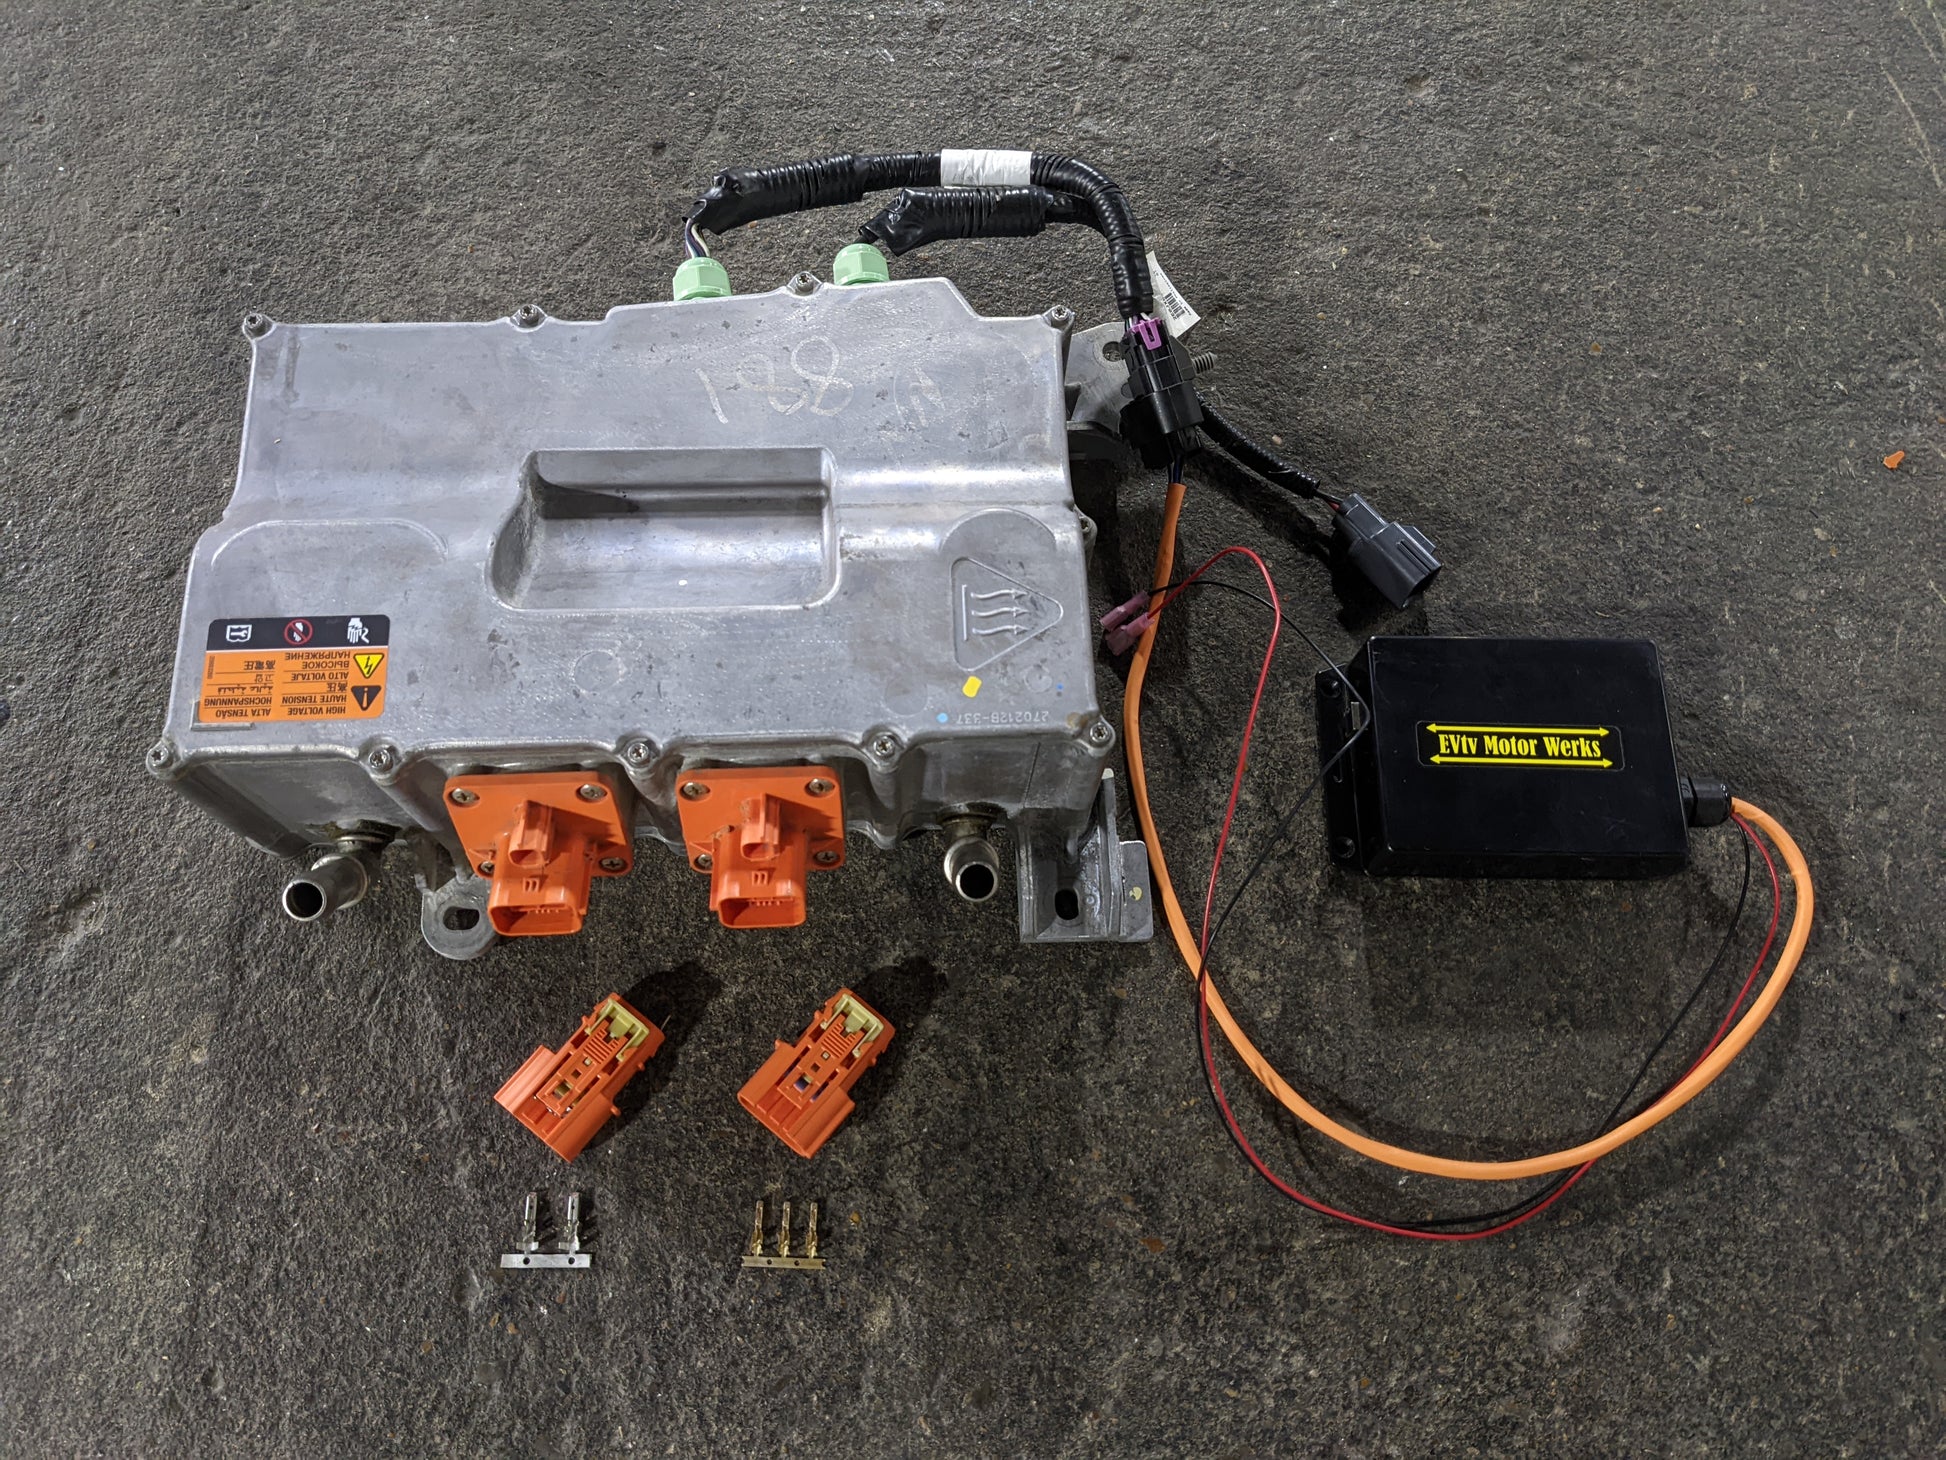 The Lear 3.3kW charger is used on a variety of OEM applications including the Chevrolet Volt and Cadillac ELR. The included EVTV Lear controller allows for standalone operation of the Lear 3.3kW.